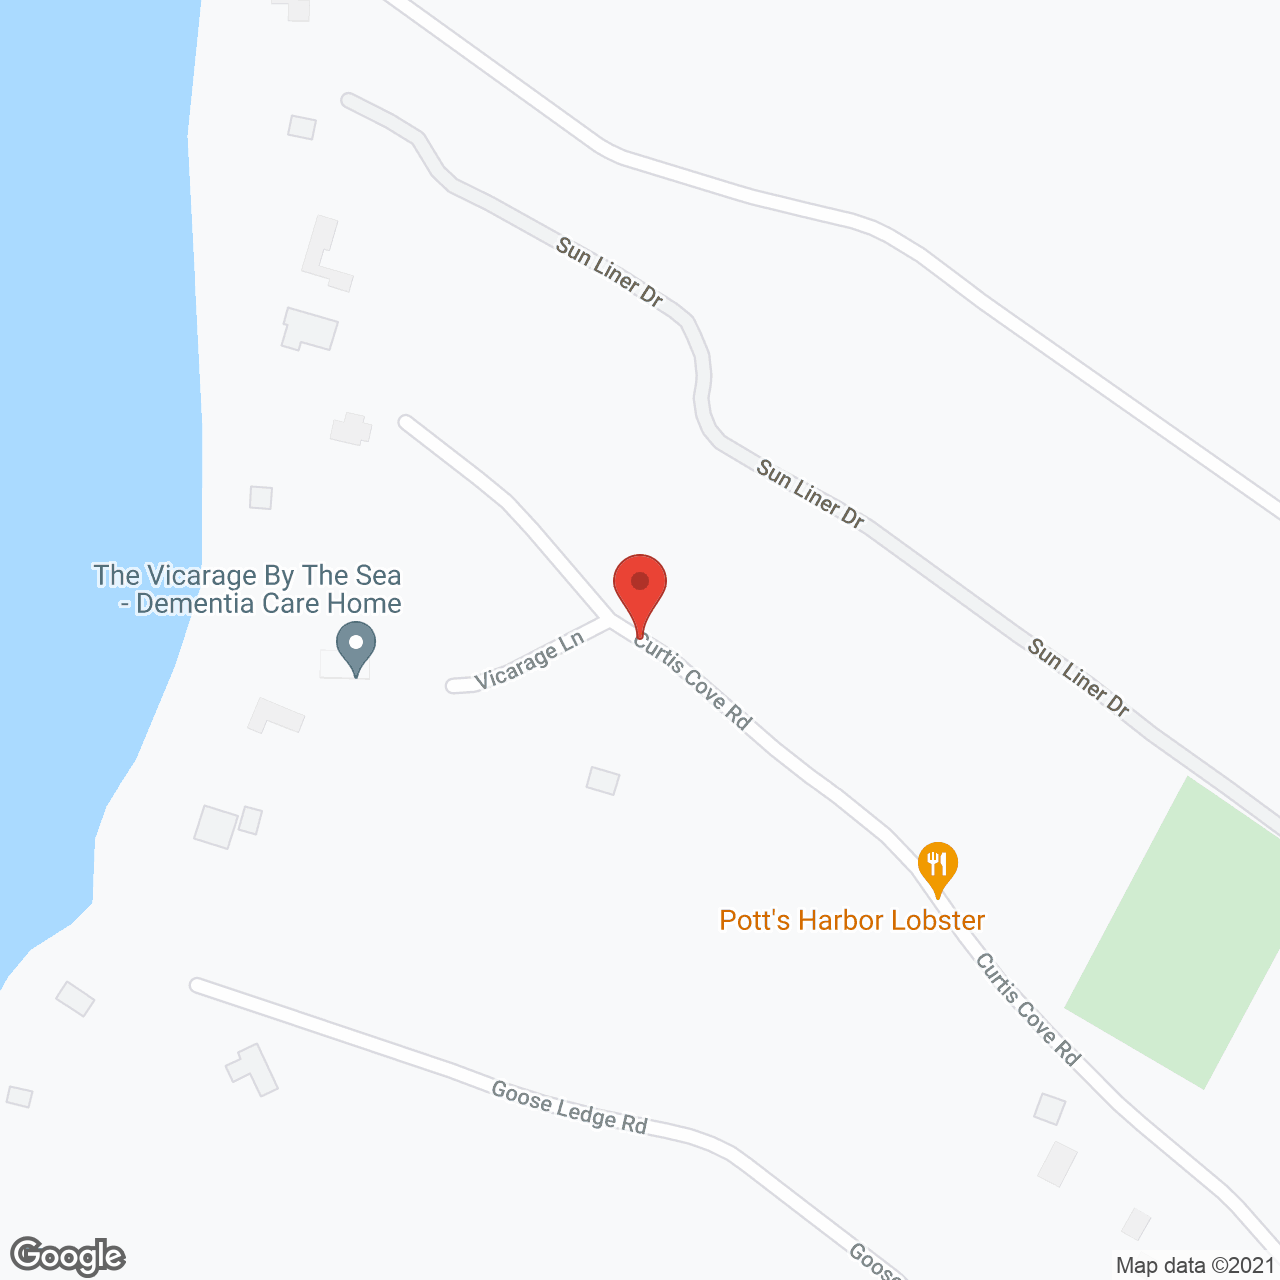 Vicarage By the Sea in google map